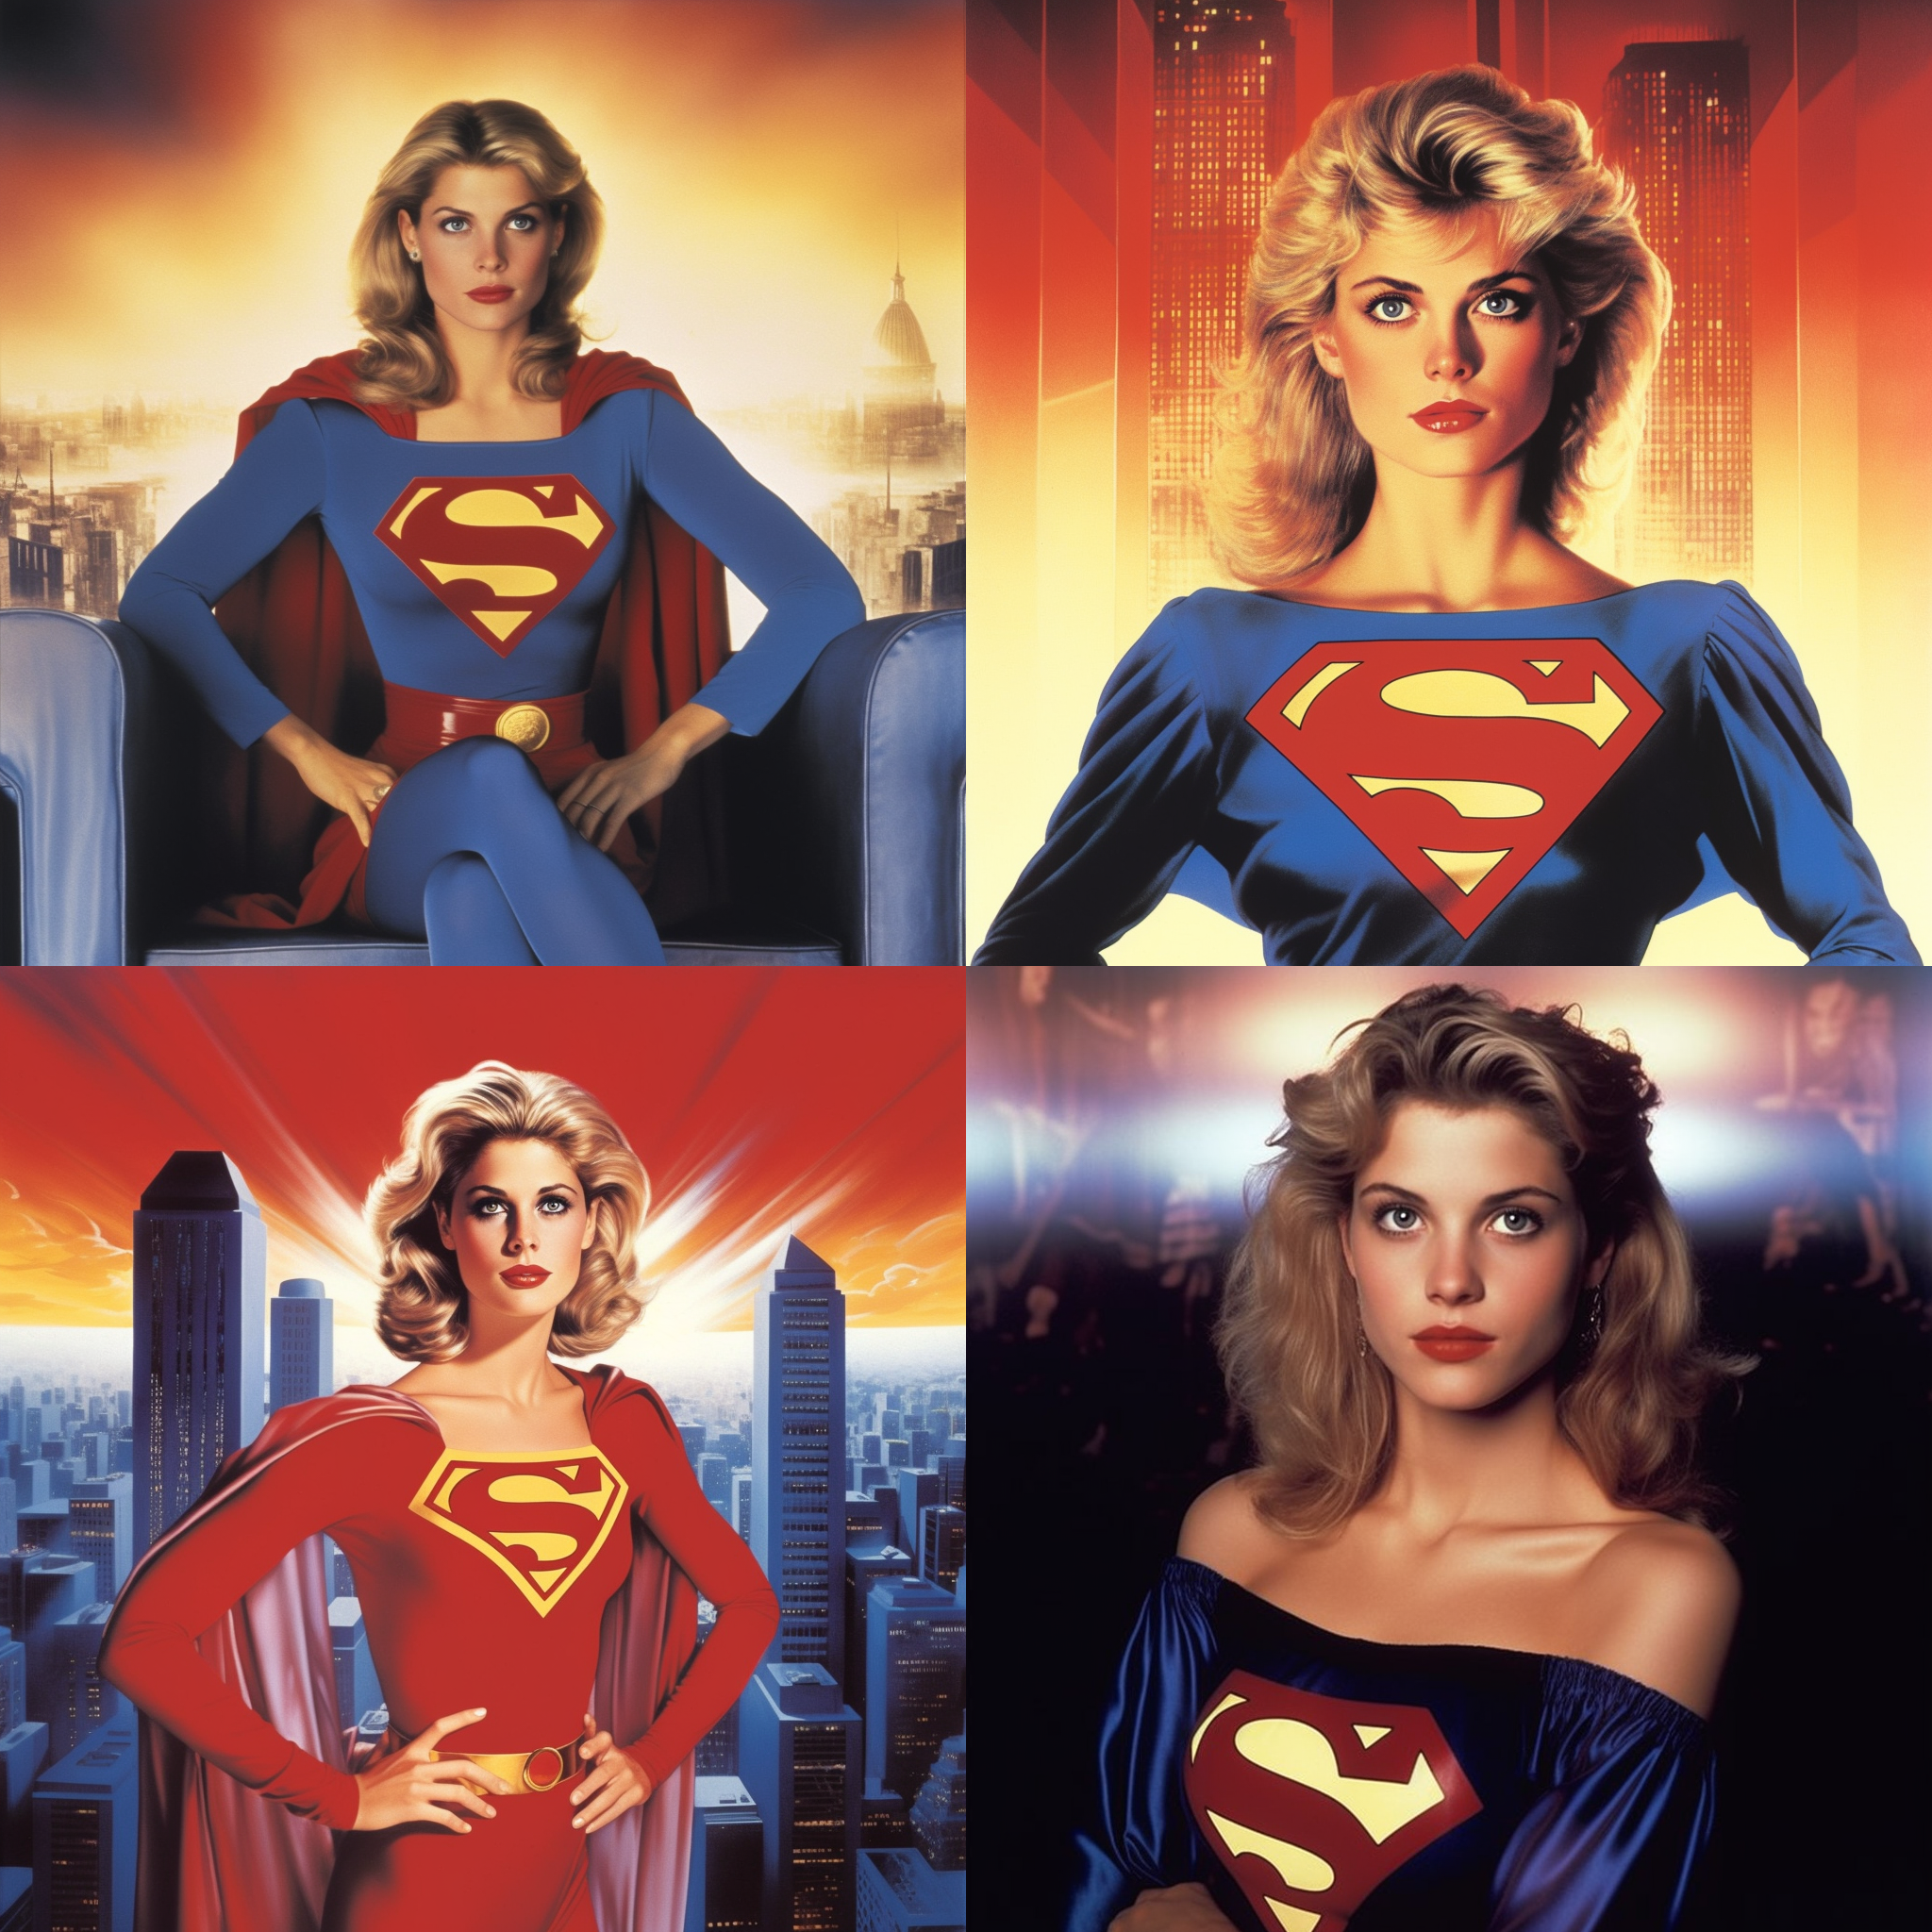 Sir_Frogdick_Supergirl_the_movie_1984_made_at_Pinewood_starring_85c6e65d-a86e-44e9-96b6-7faef0aa26d0.png